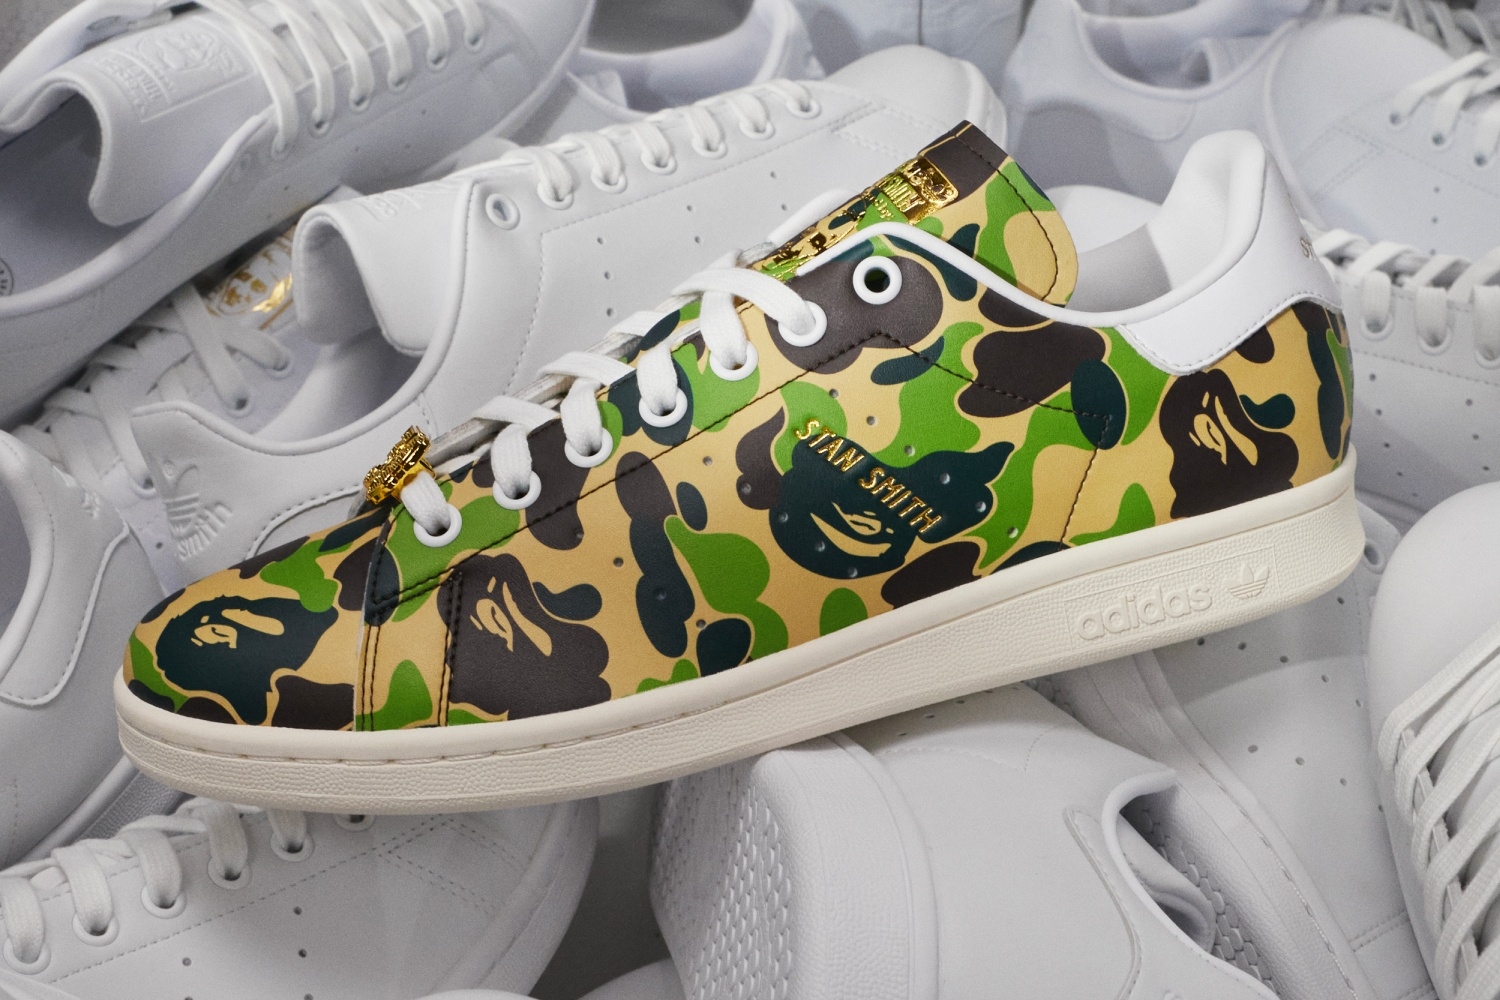 Release reminder: the latest BAPE x adidas Stan Smith from the '30th Anniversary' Pack